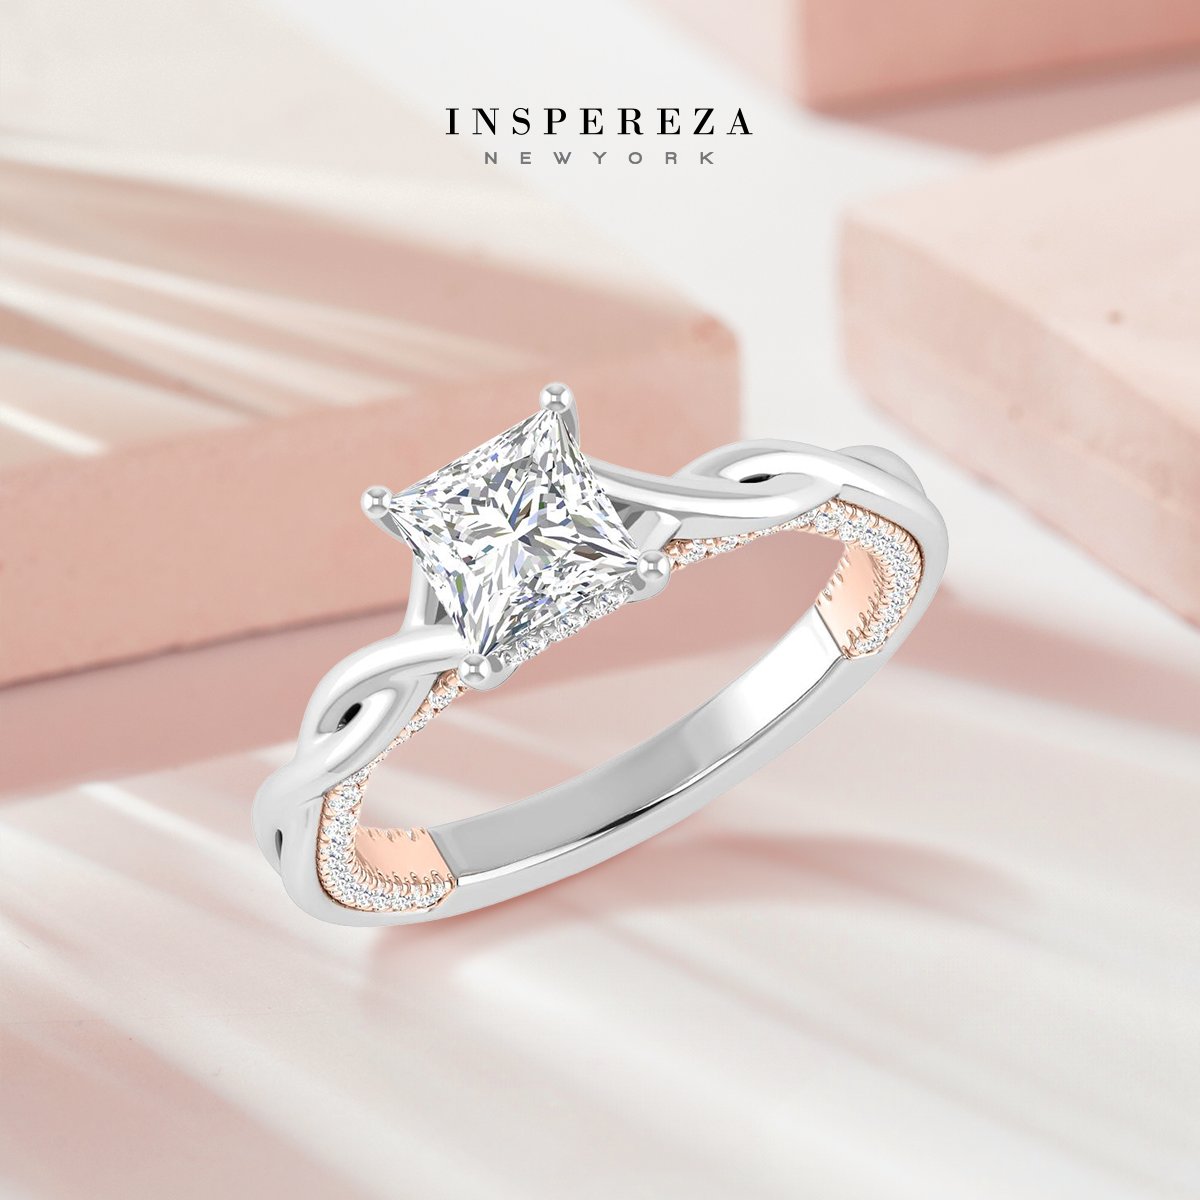 A timeless treasure for a royal lady. This princess-cut masterpiece deserves a queen who is fierce and ready to rule the world.
Ring: shorturl.at/wP149
#Inspereza #InsperezaNewyork #InsperezaInspiration #Ring #DiamondRing #Masterpiece #Jewelry #WomenJewelry